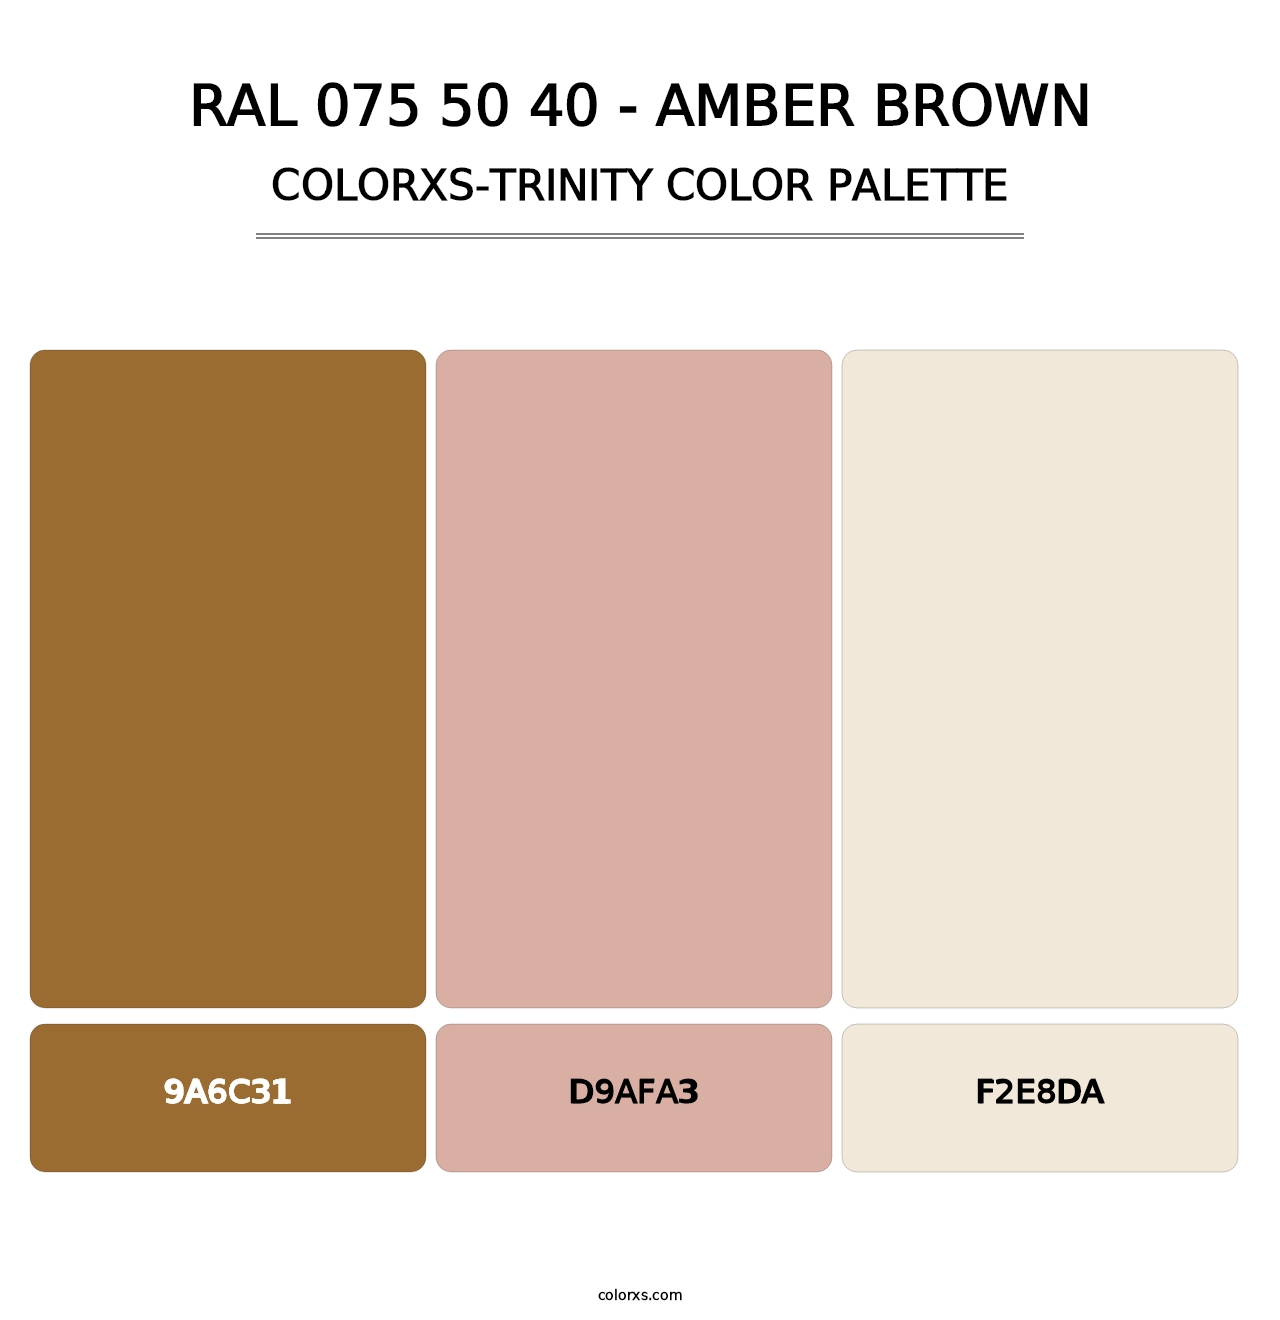 RAL 075 50 40 - Amber Brown - Colorxs Trinity Palette